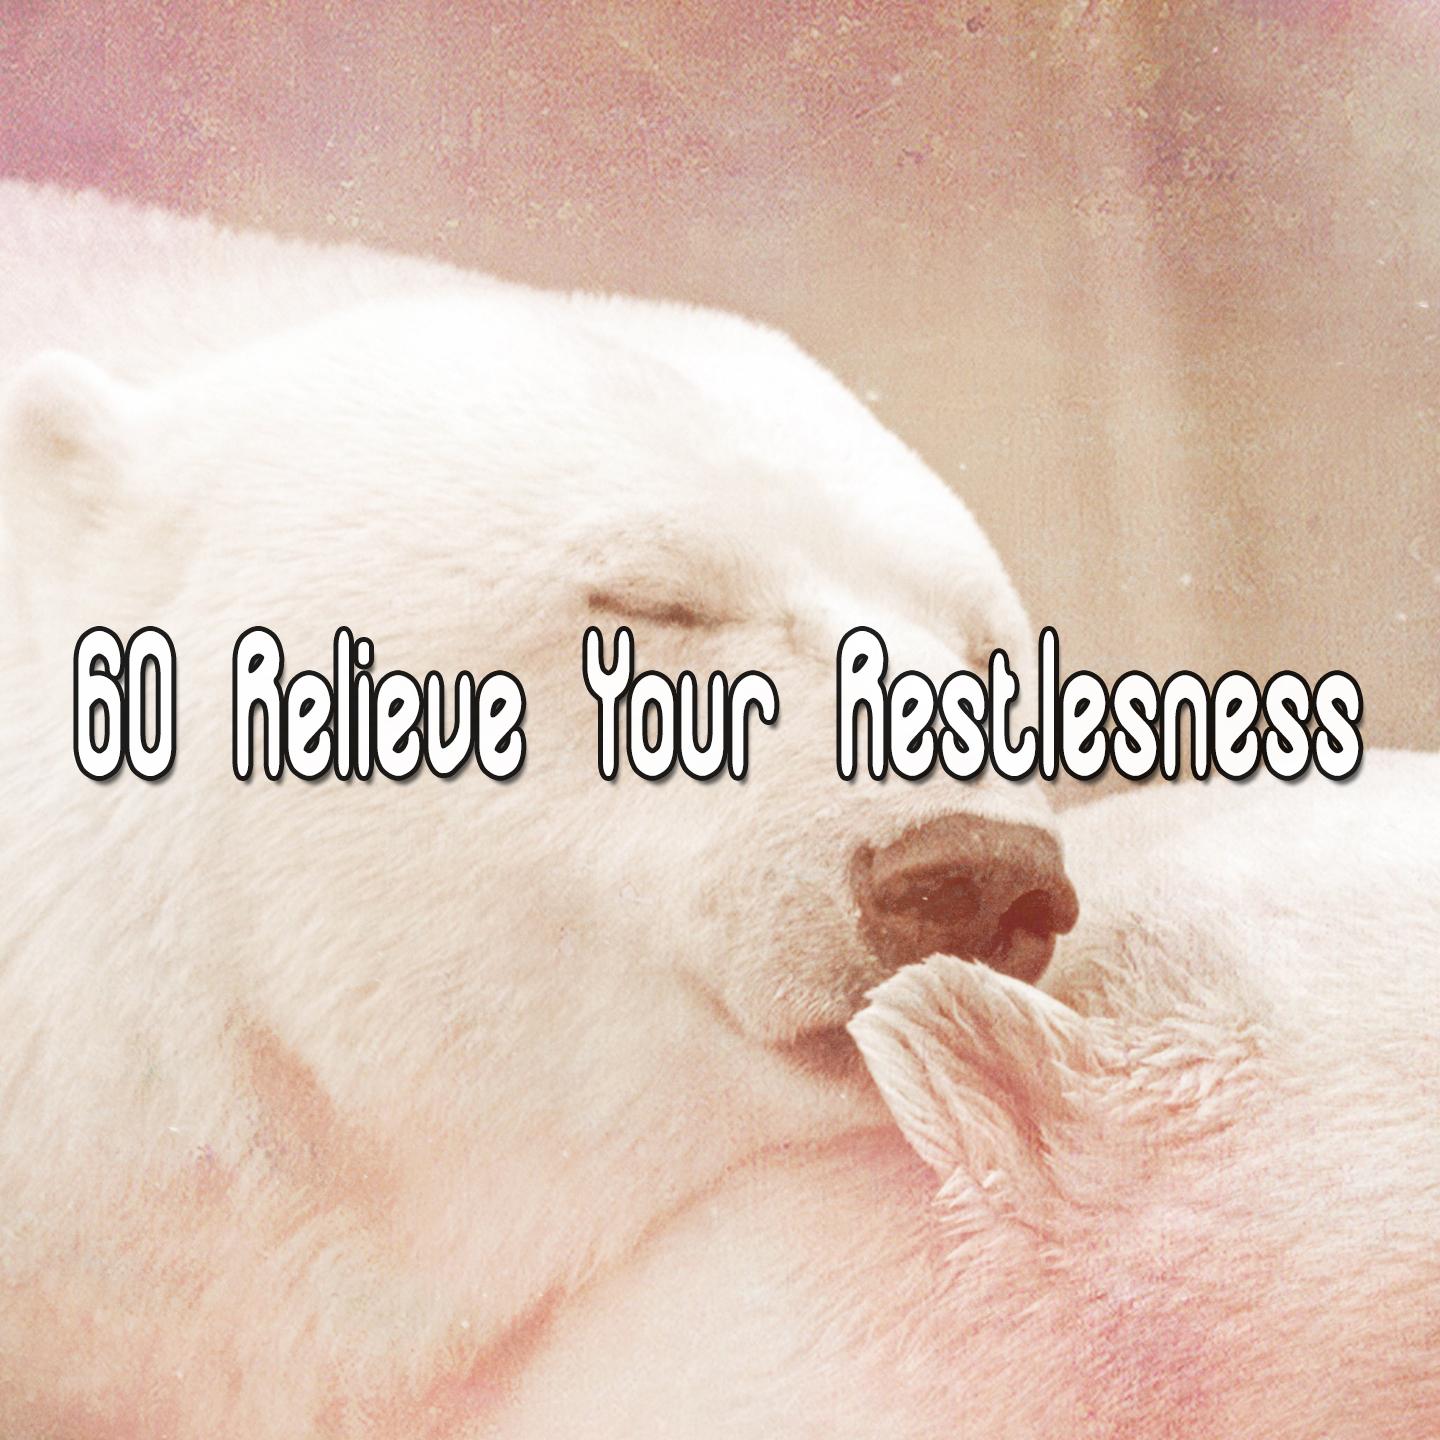 60 Relieve Your Restlesness